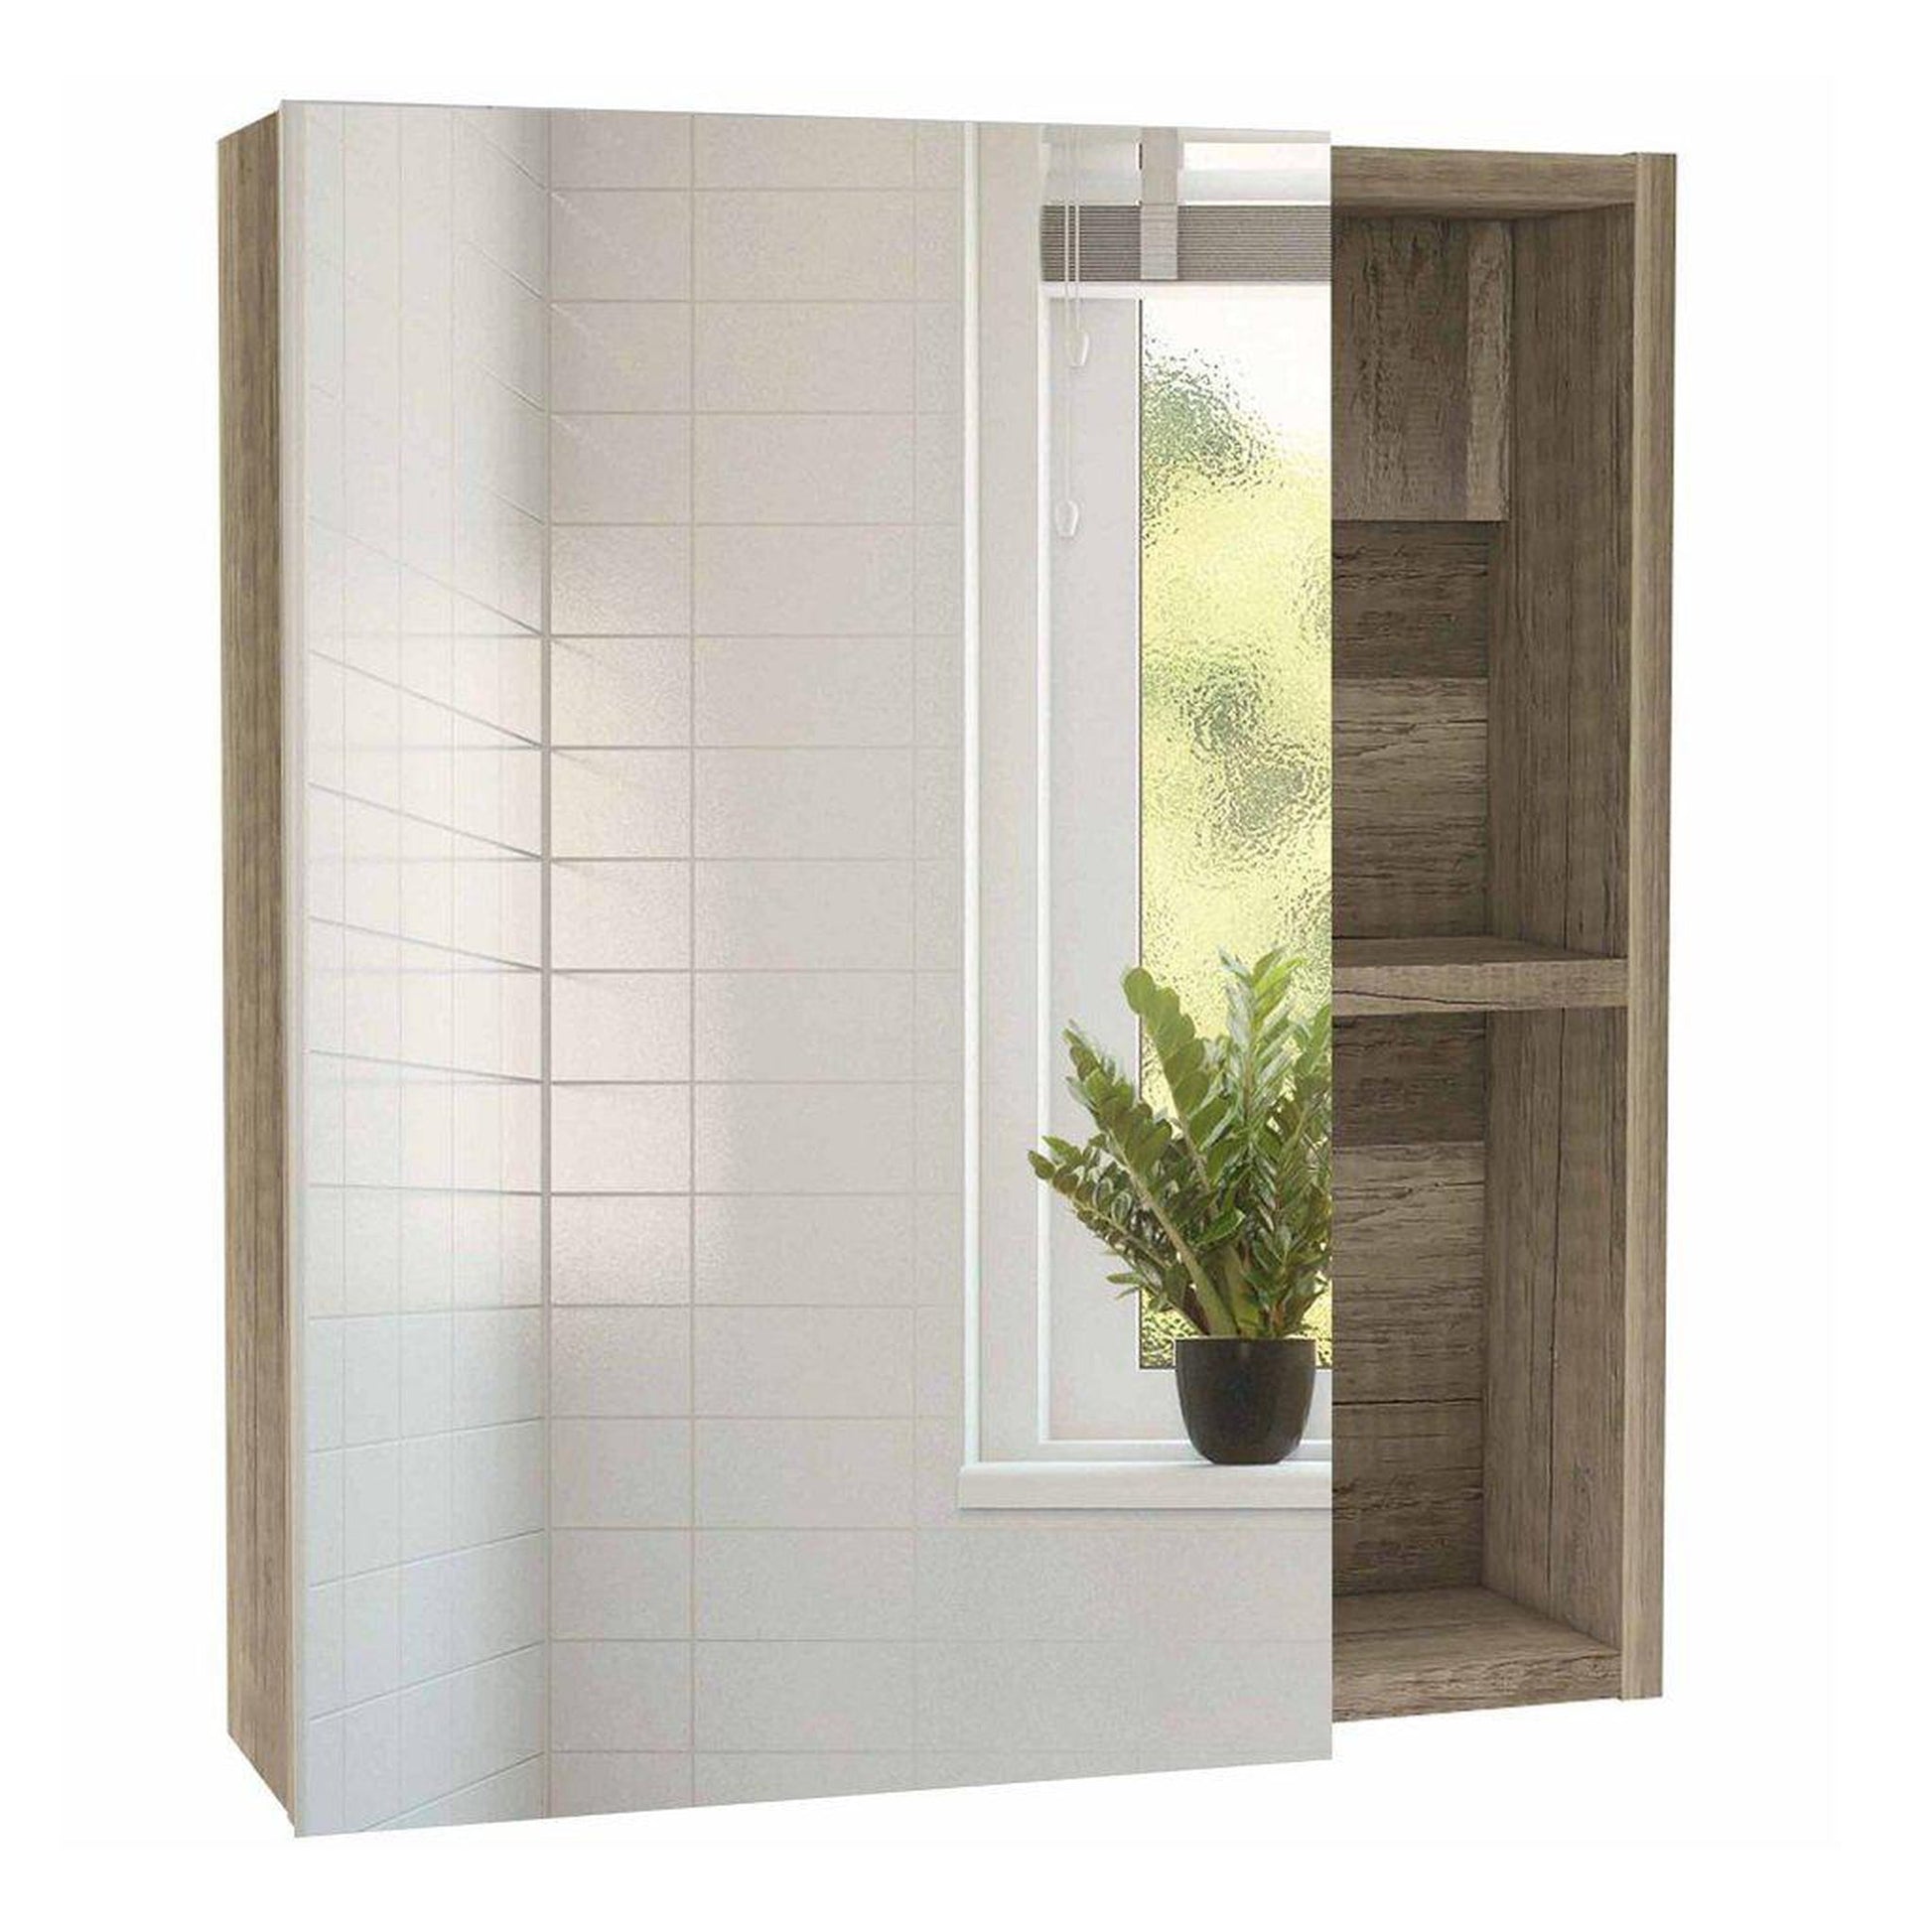 Tuhome Labelle Medicine Cabinet with Mirror Weathered Oak